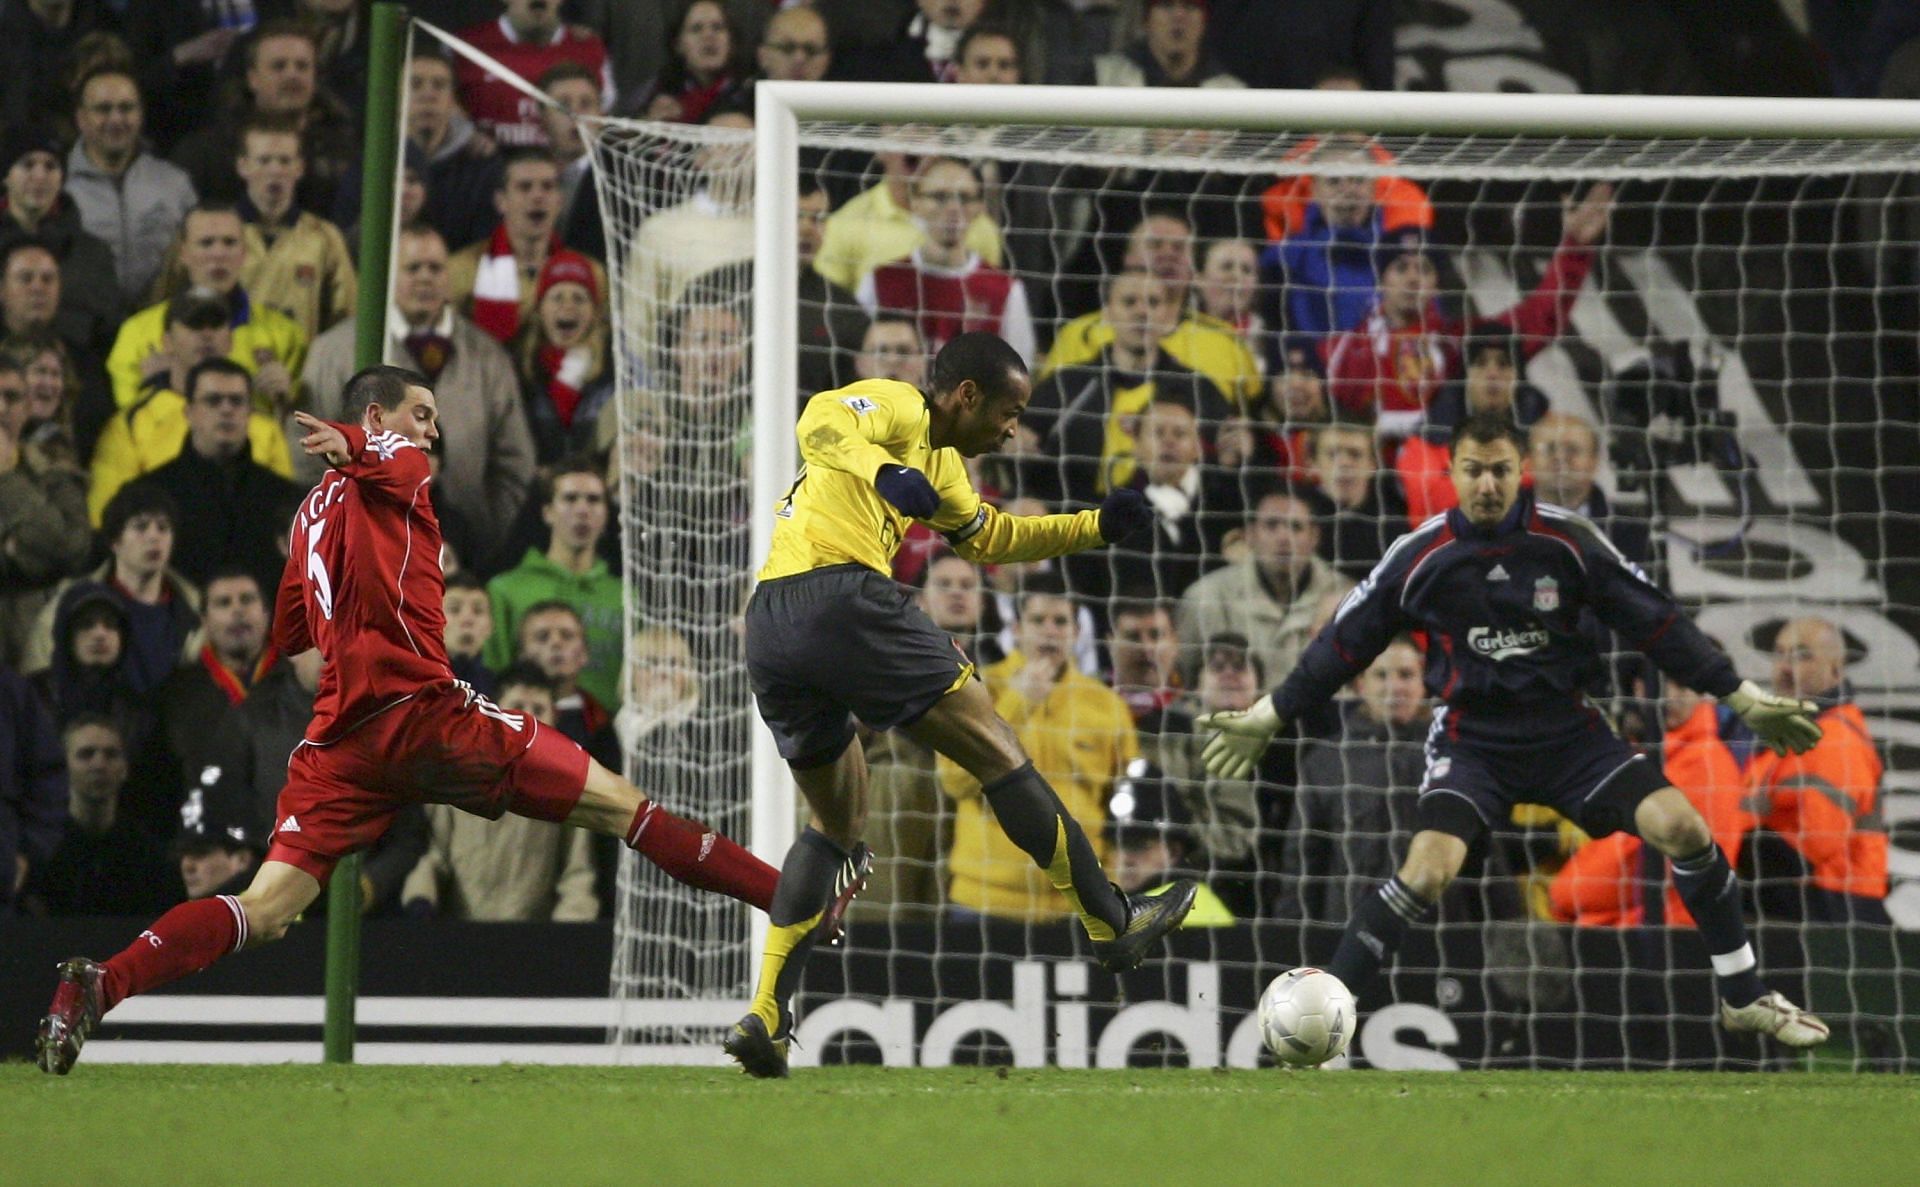 Thierry Henry attempting a shot from the edge of the box.